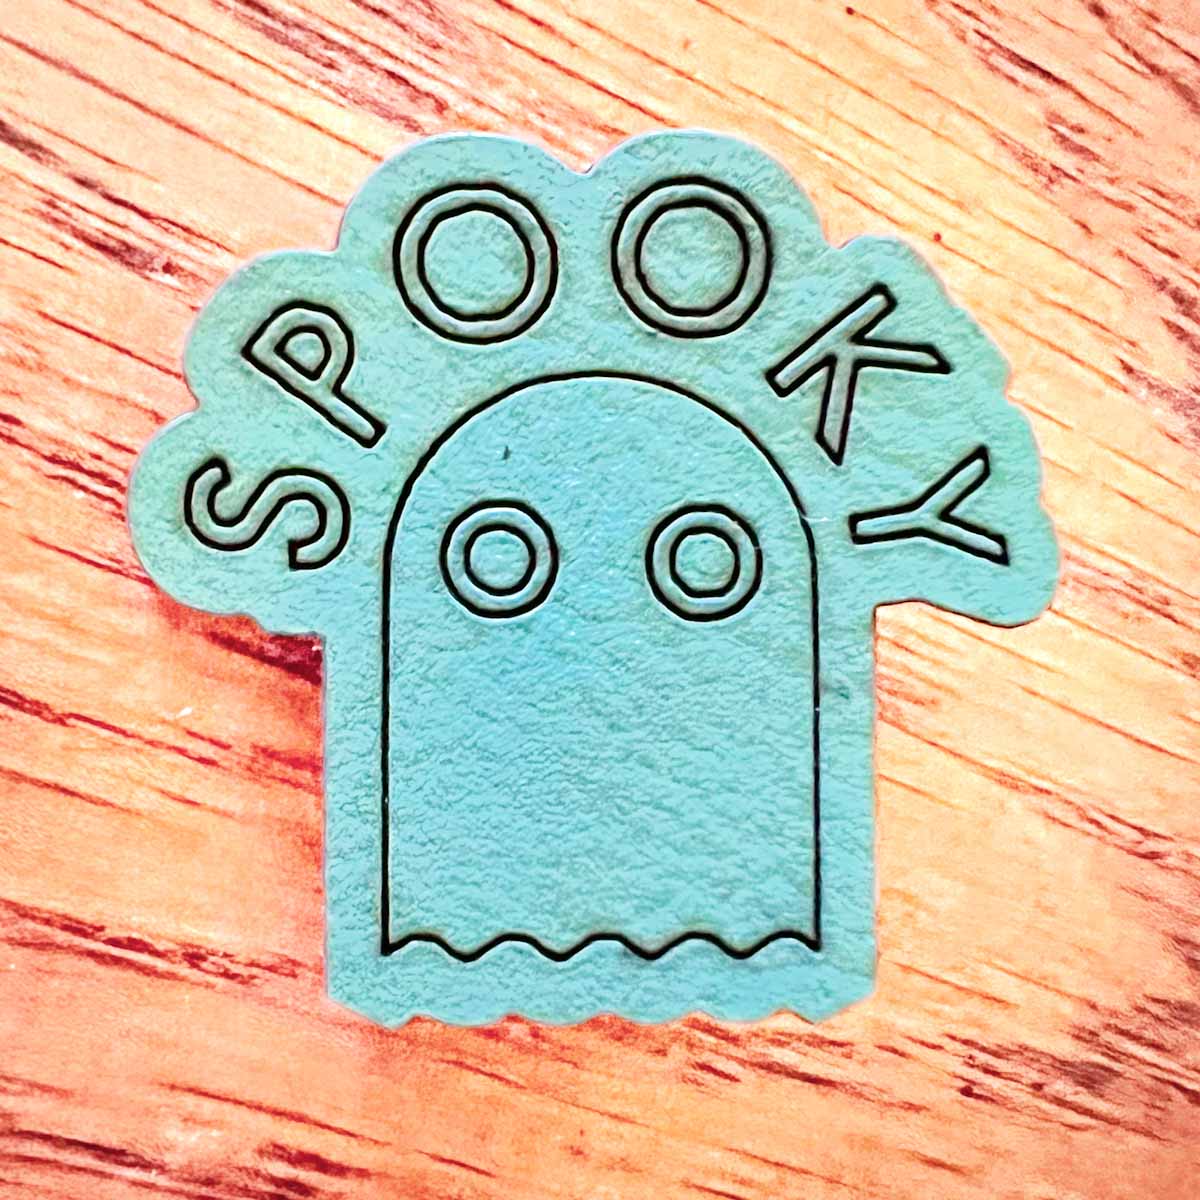 Spooky Ghost Pin Cute Paranormal; Melasdesign Handmade Darkness; pinback button; spooky pin; ghost pin; Halloween pin; gothic pin; fashion accessory